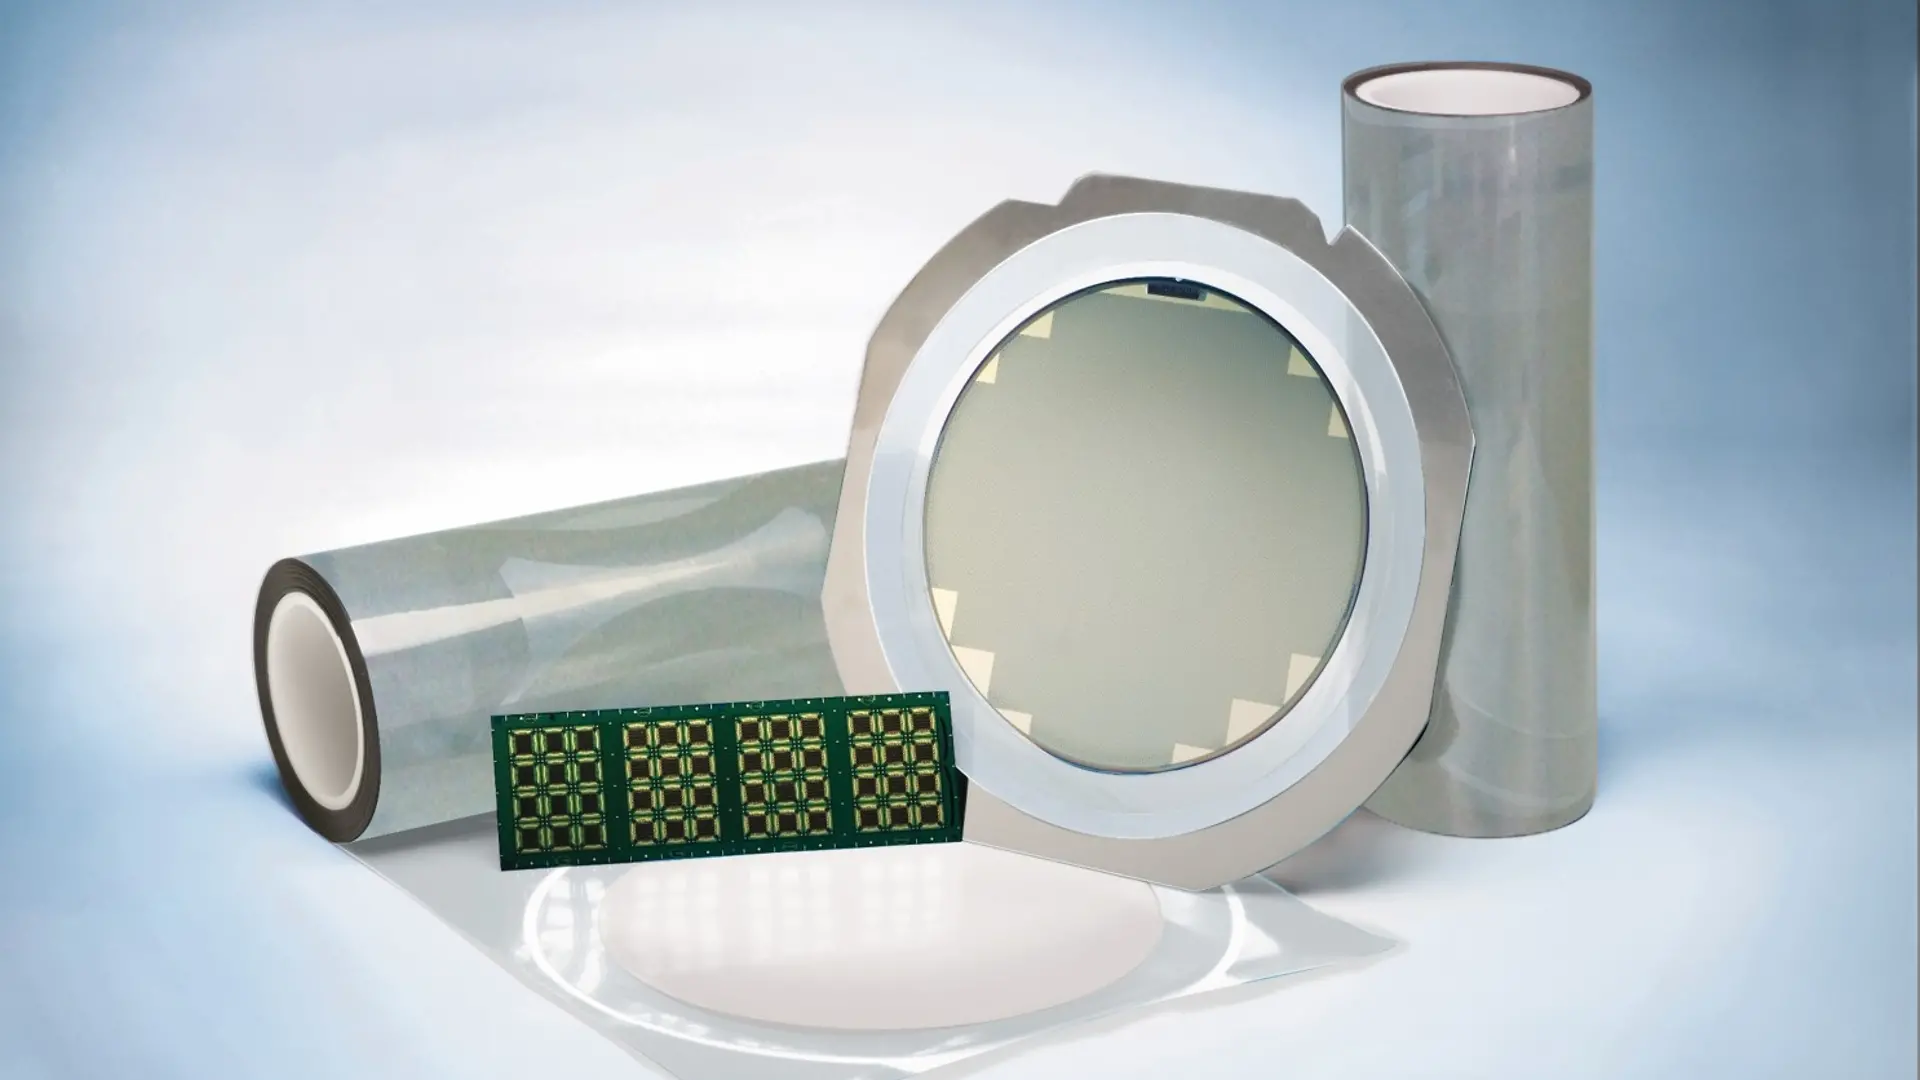 
Die attach films enable smaller, thinner, high-density package structures for microelectronics.